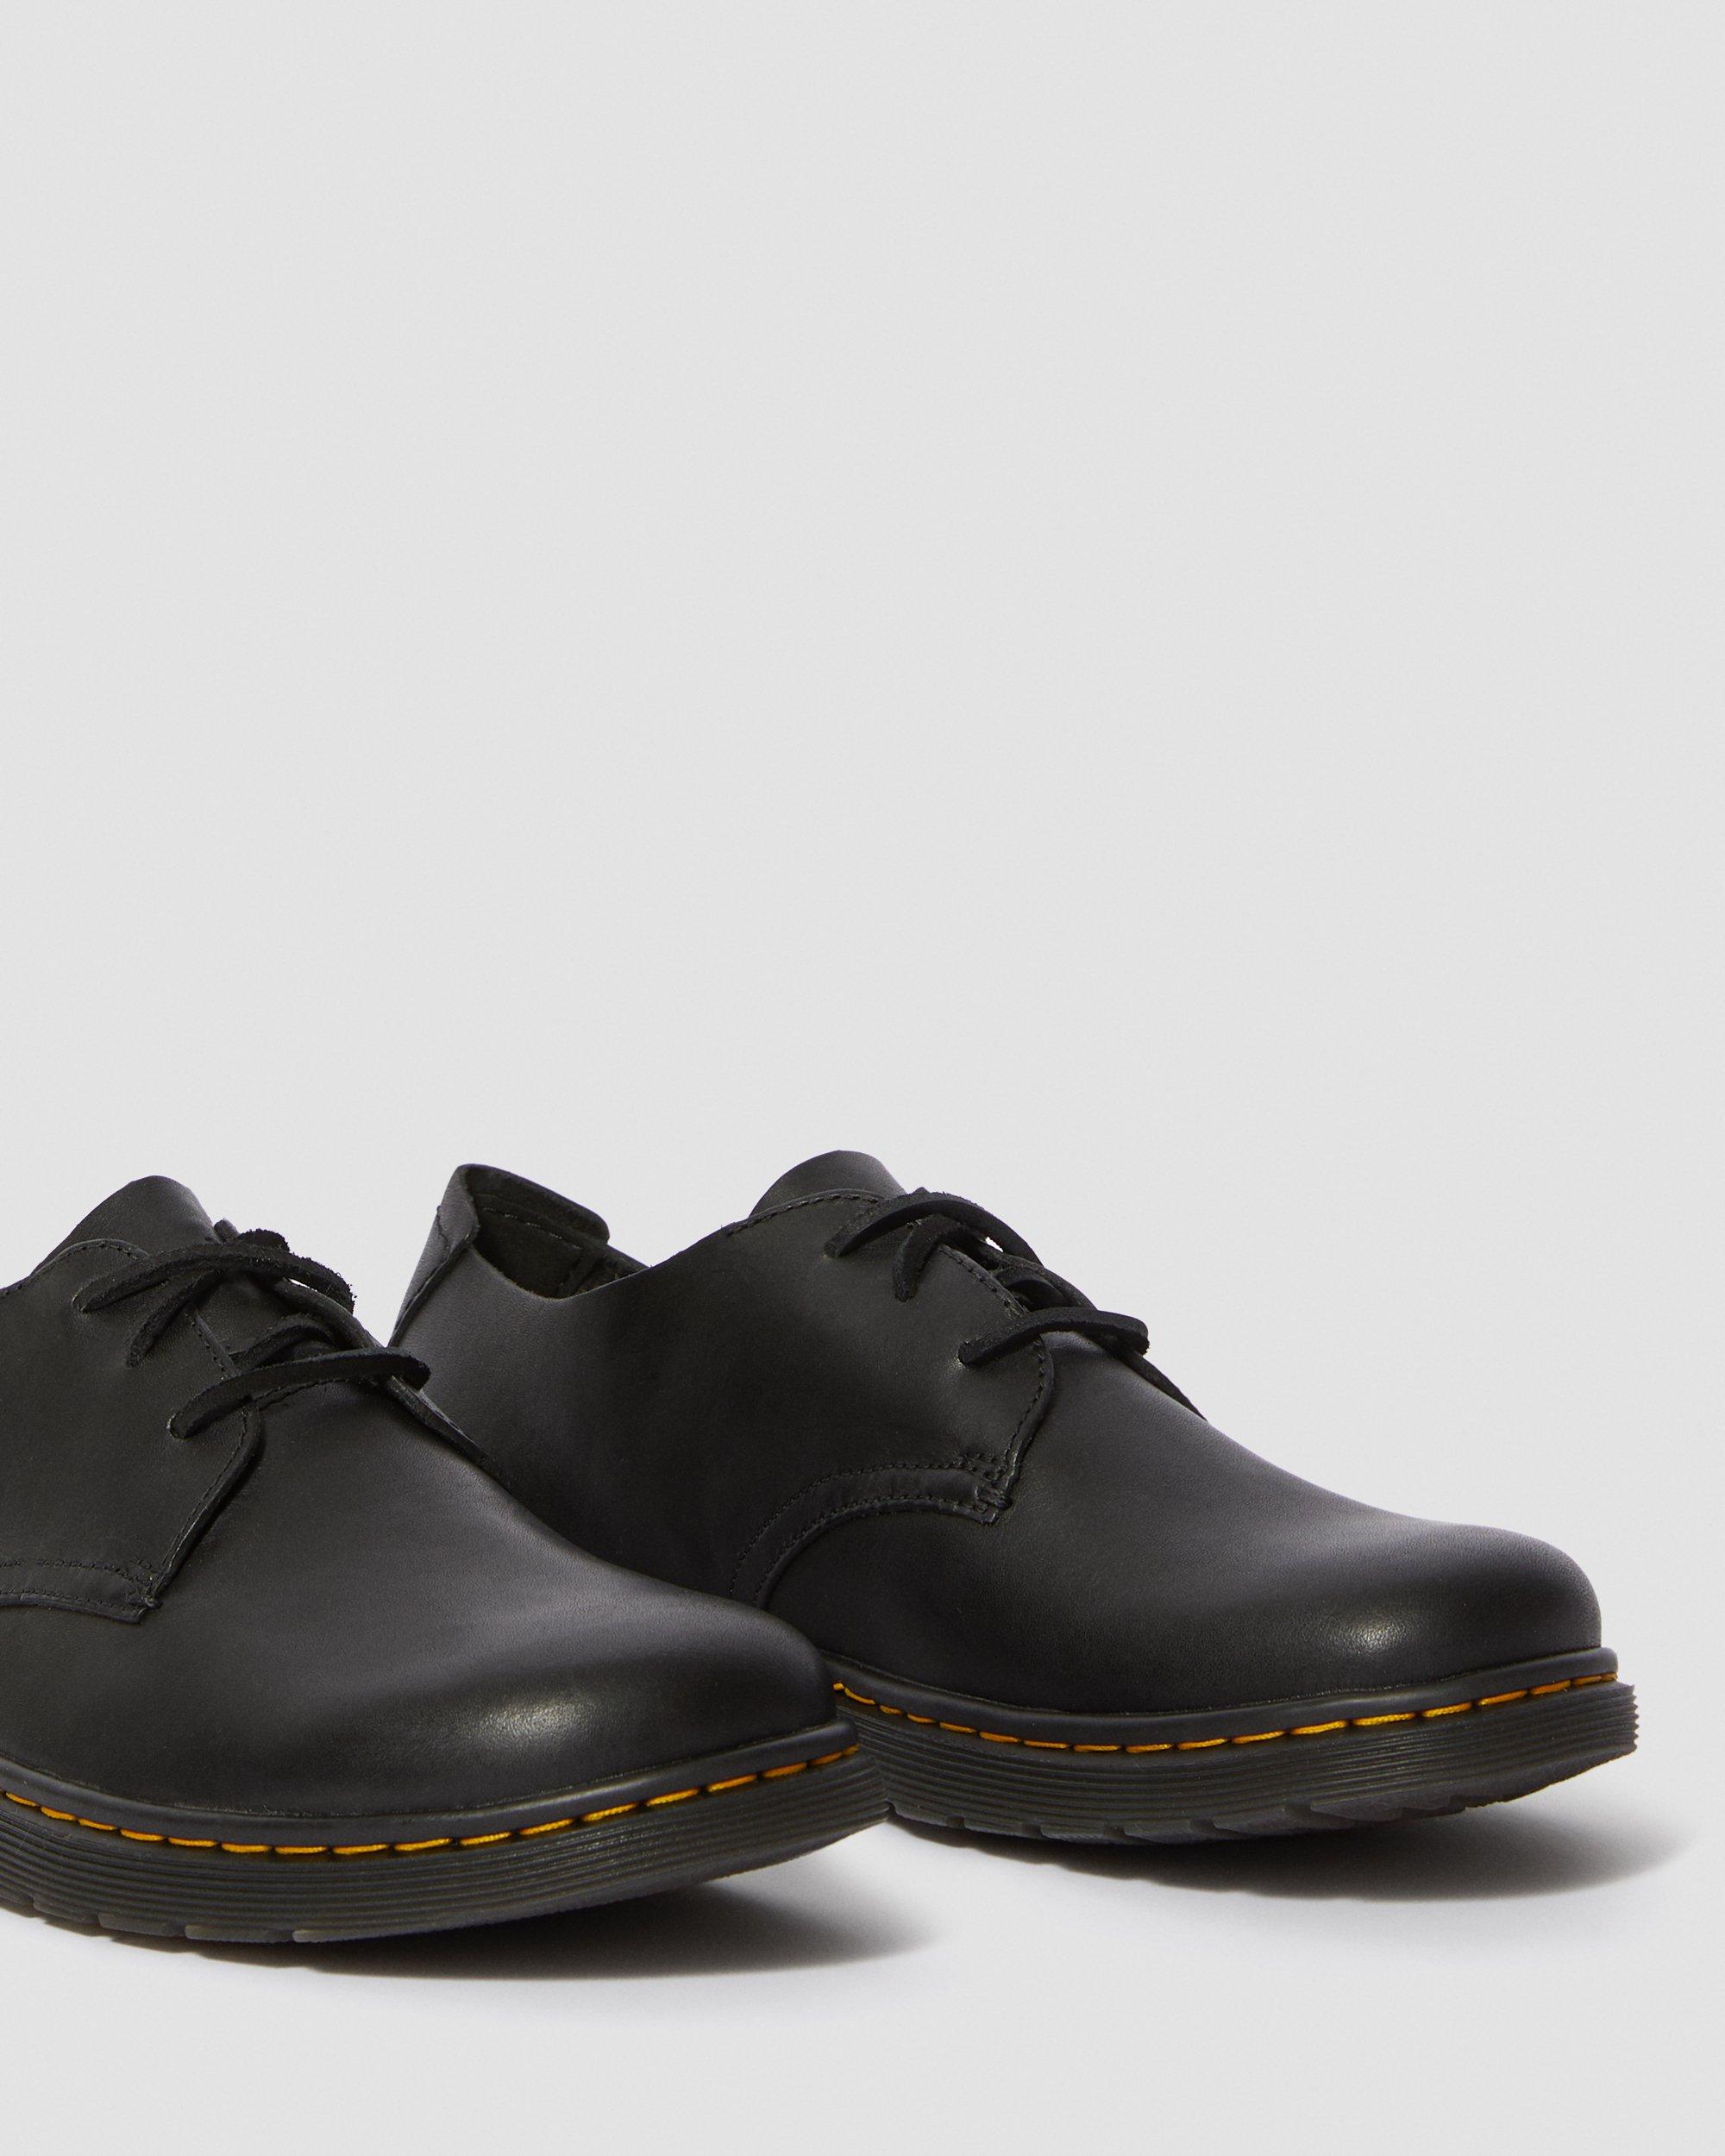 ELSFIELD LEATHER LACE 3-EYE SHOES | Dr. Martens